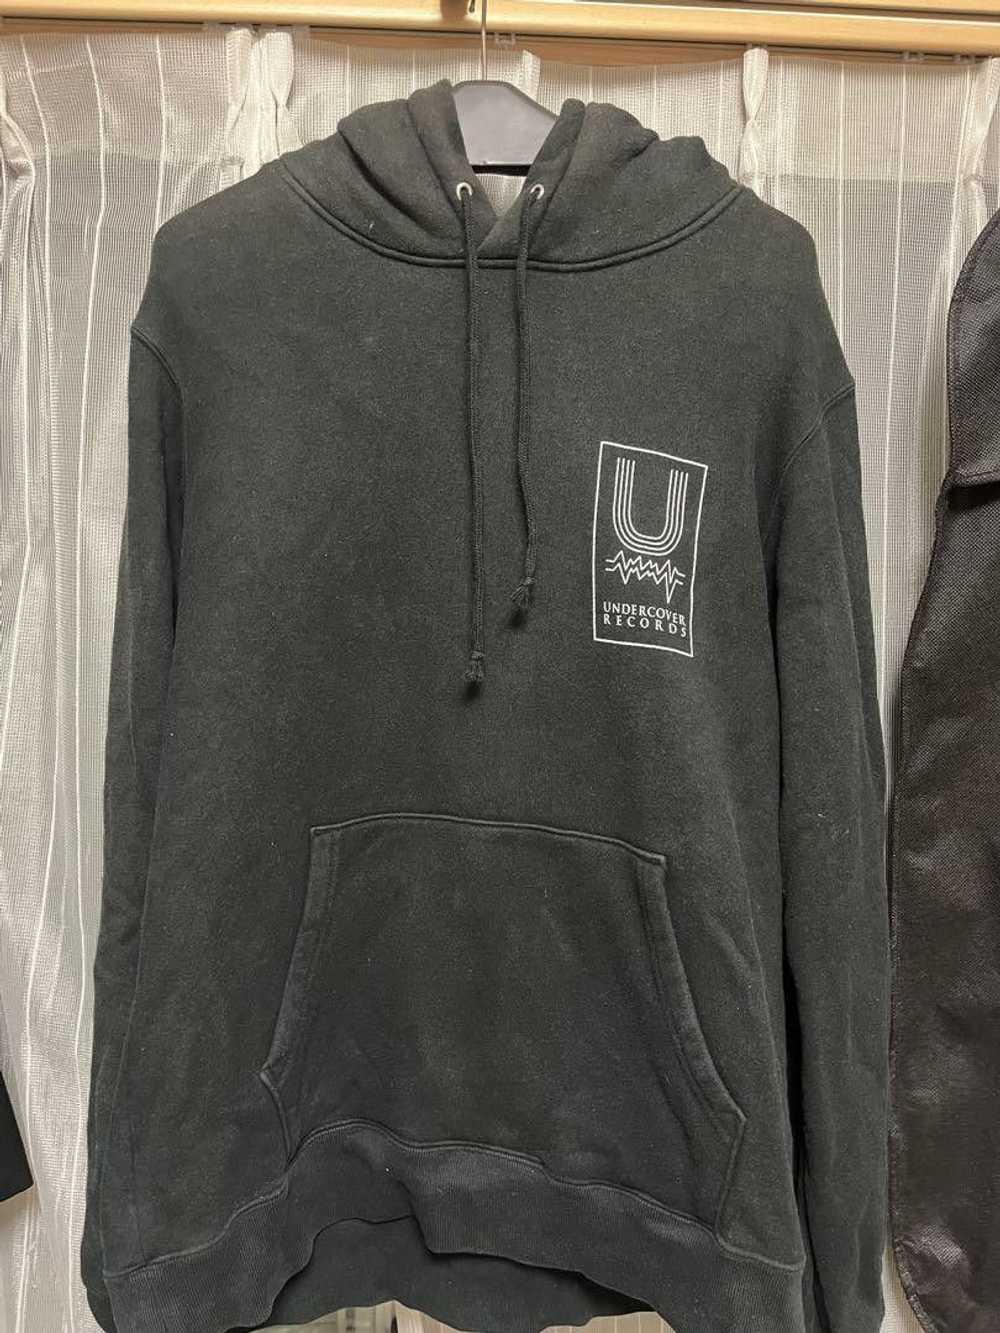 Undercover Record Label Hoodie - image 1